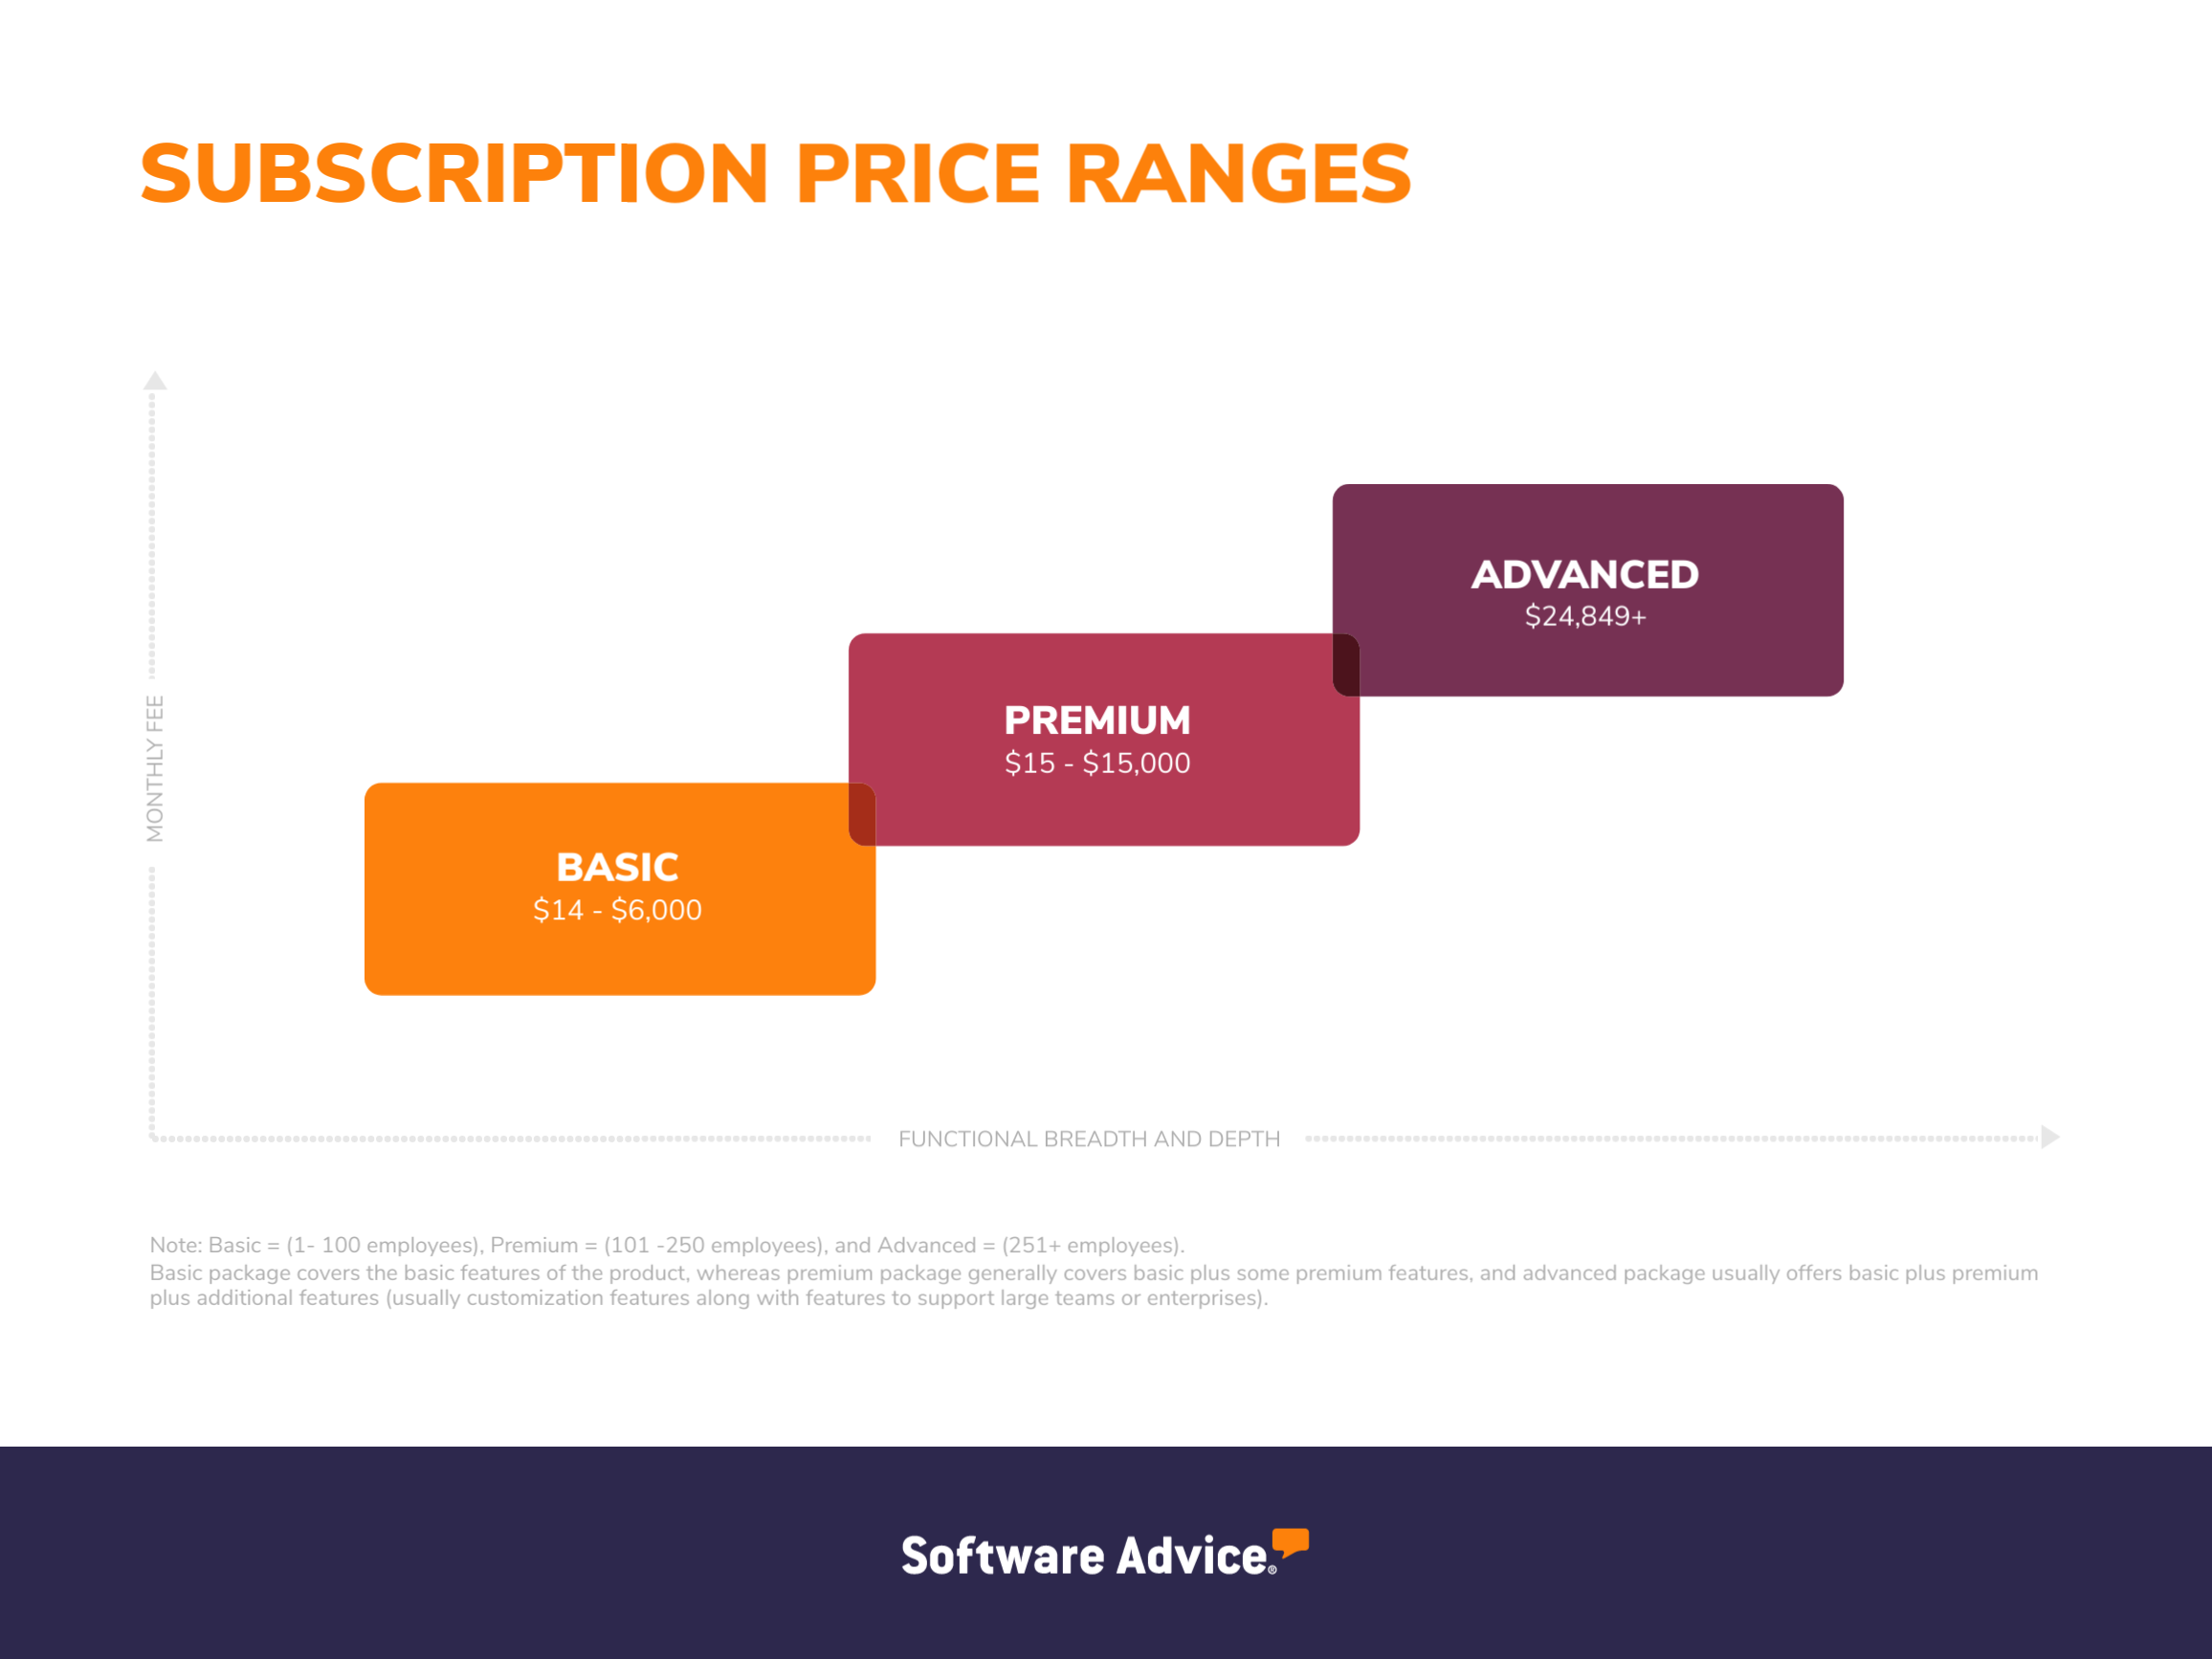 A graphic displaying CRM software subscription price ranges